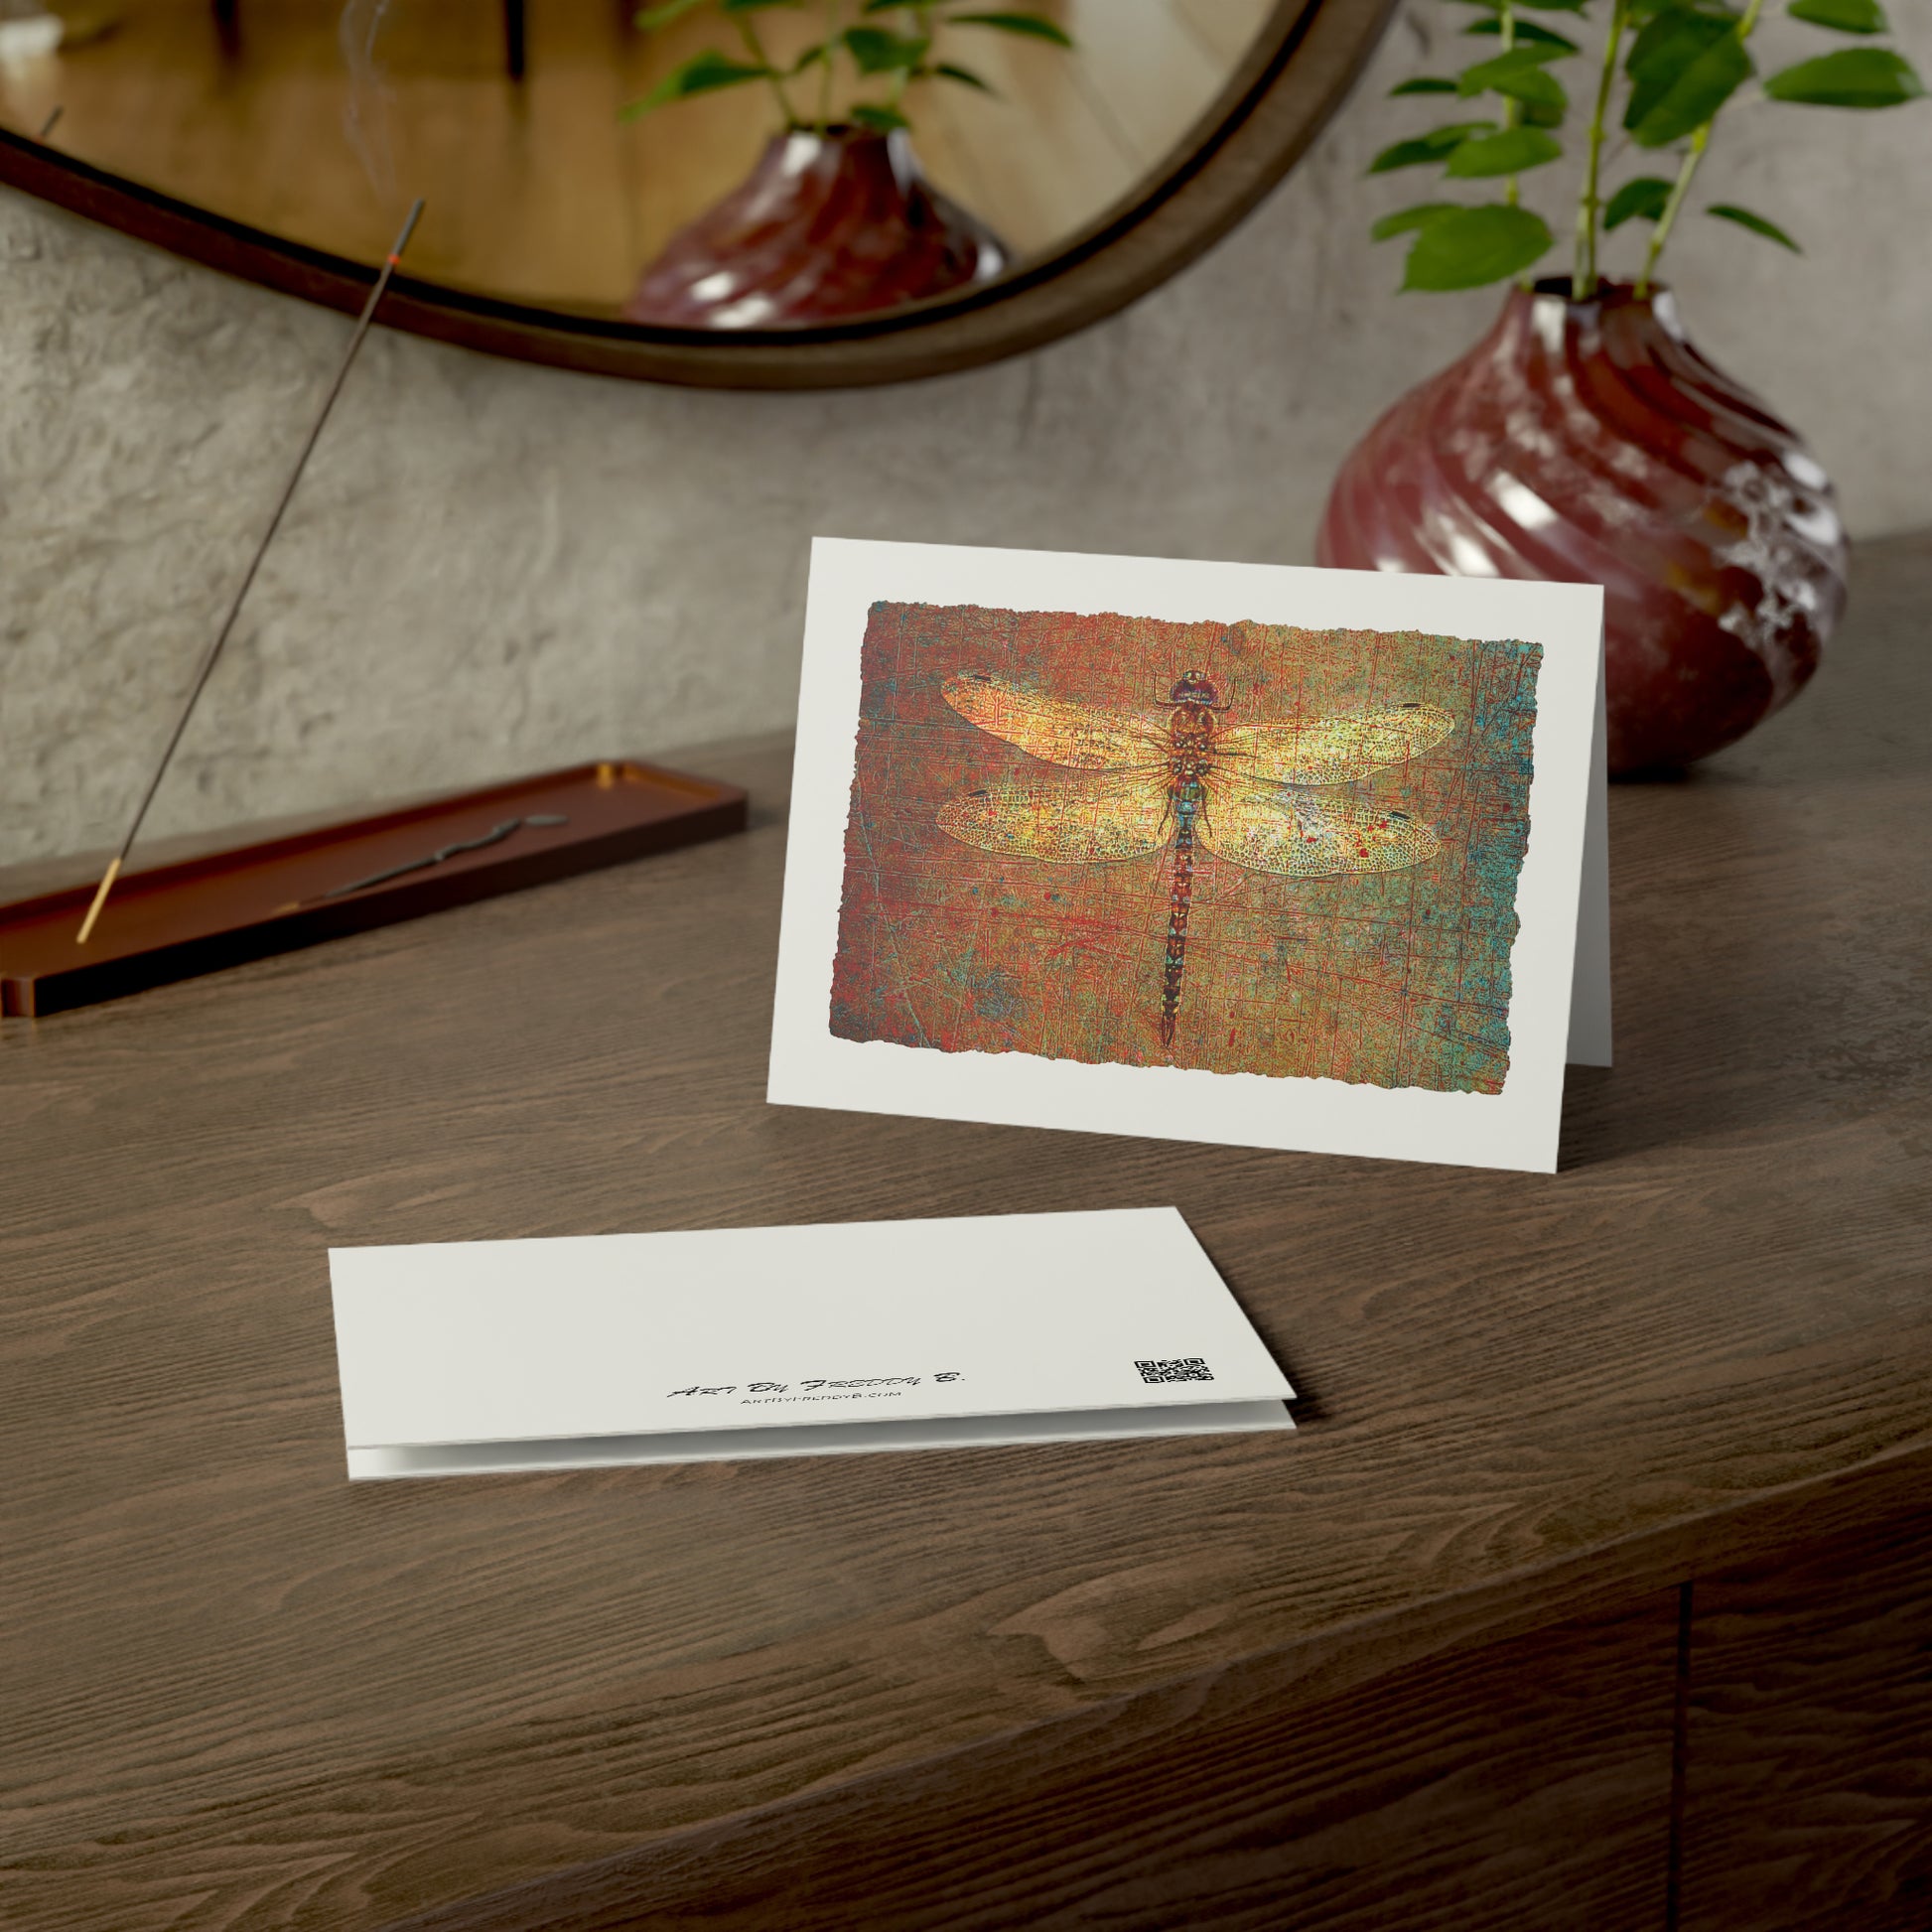 Dragonfly Print Greeting Cards Golden Dragonfly Stationery and Blank Cards on desk